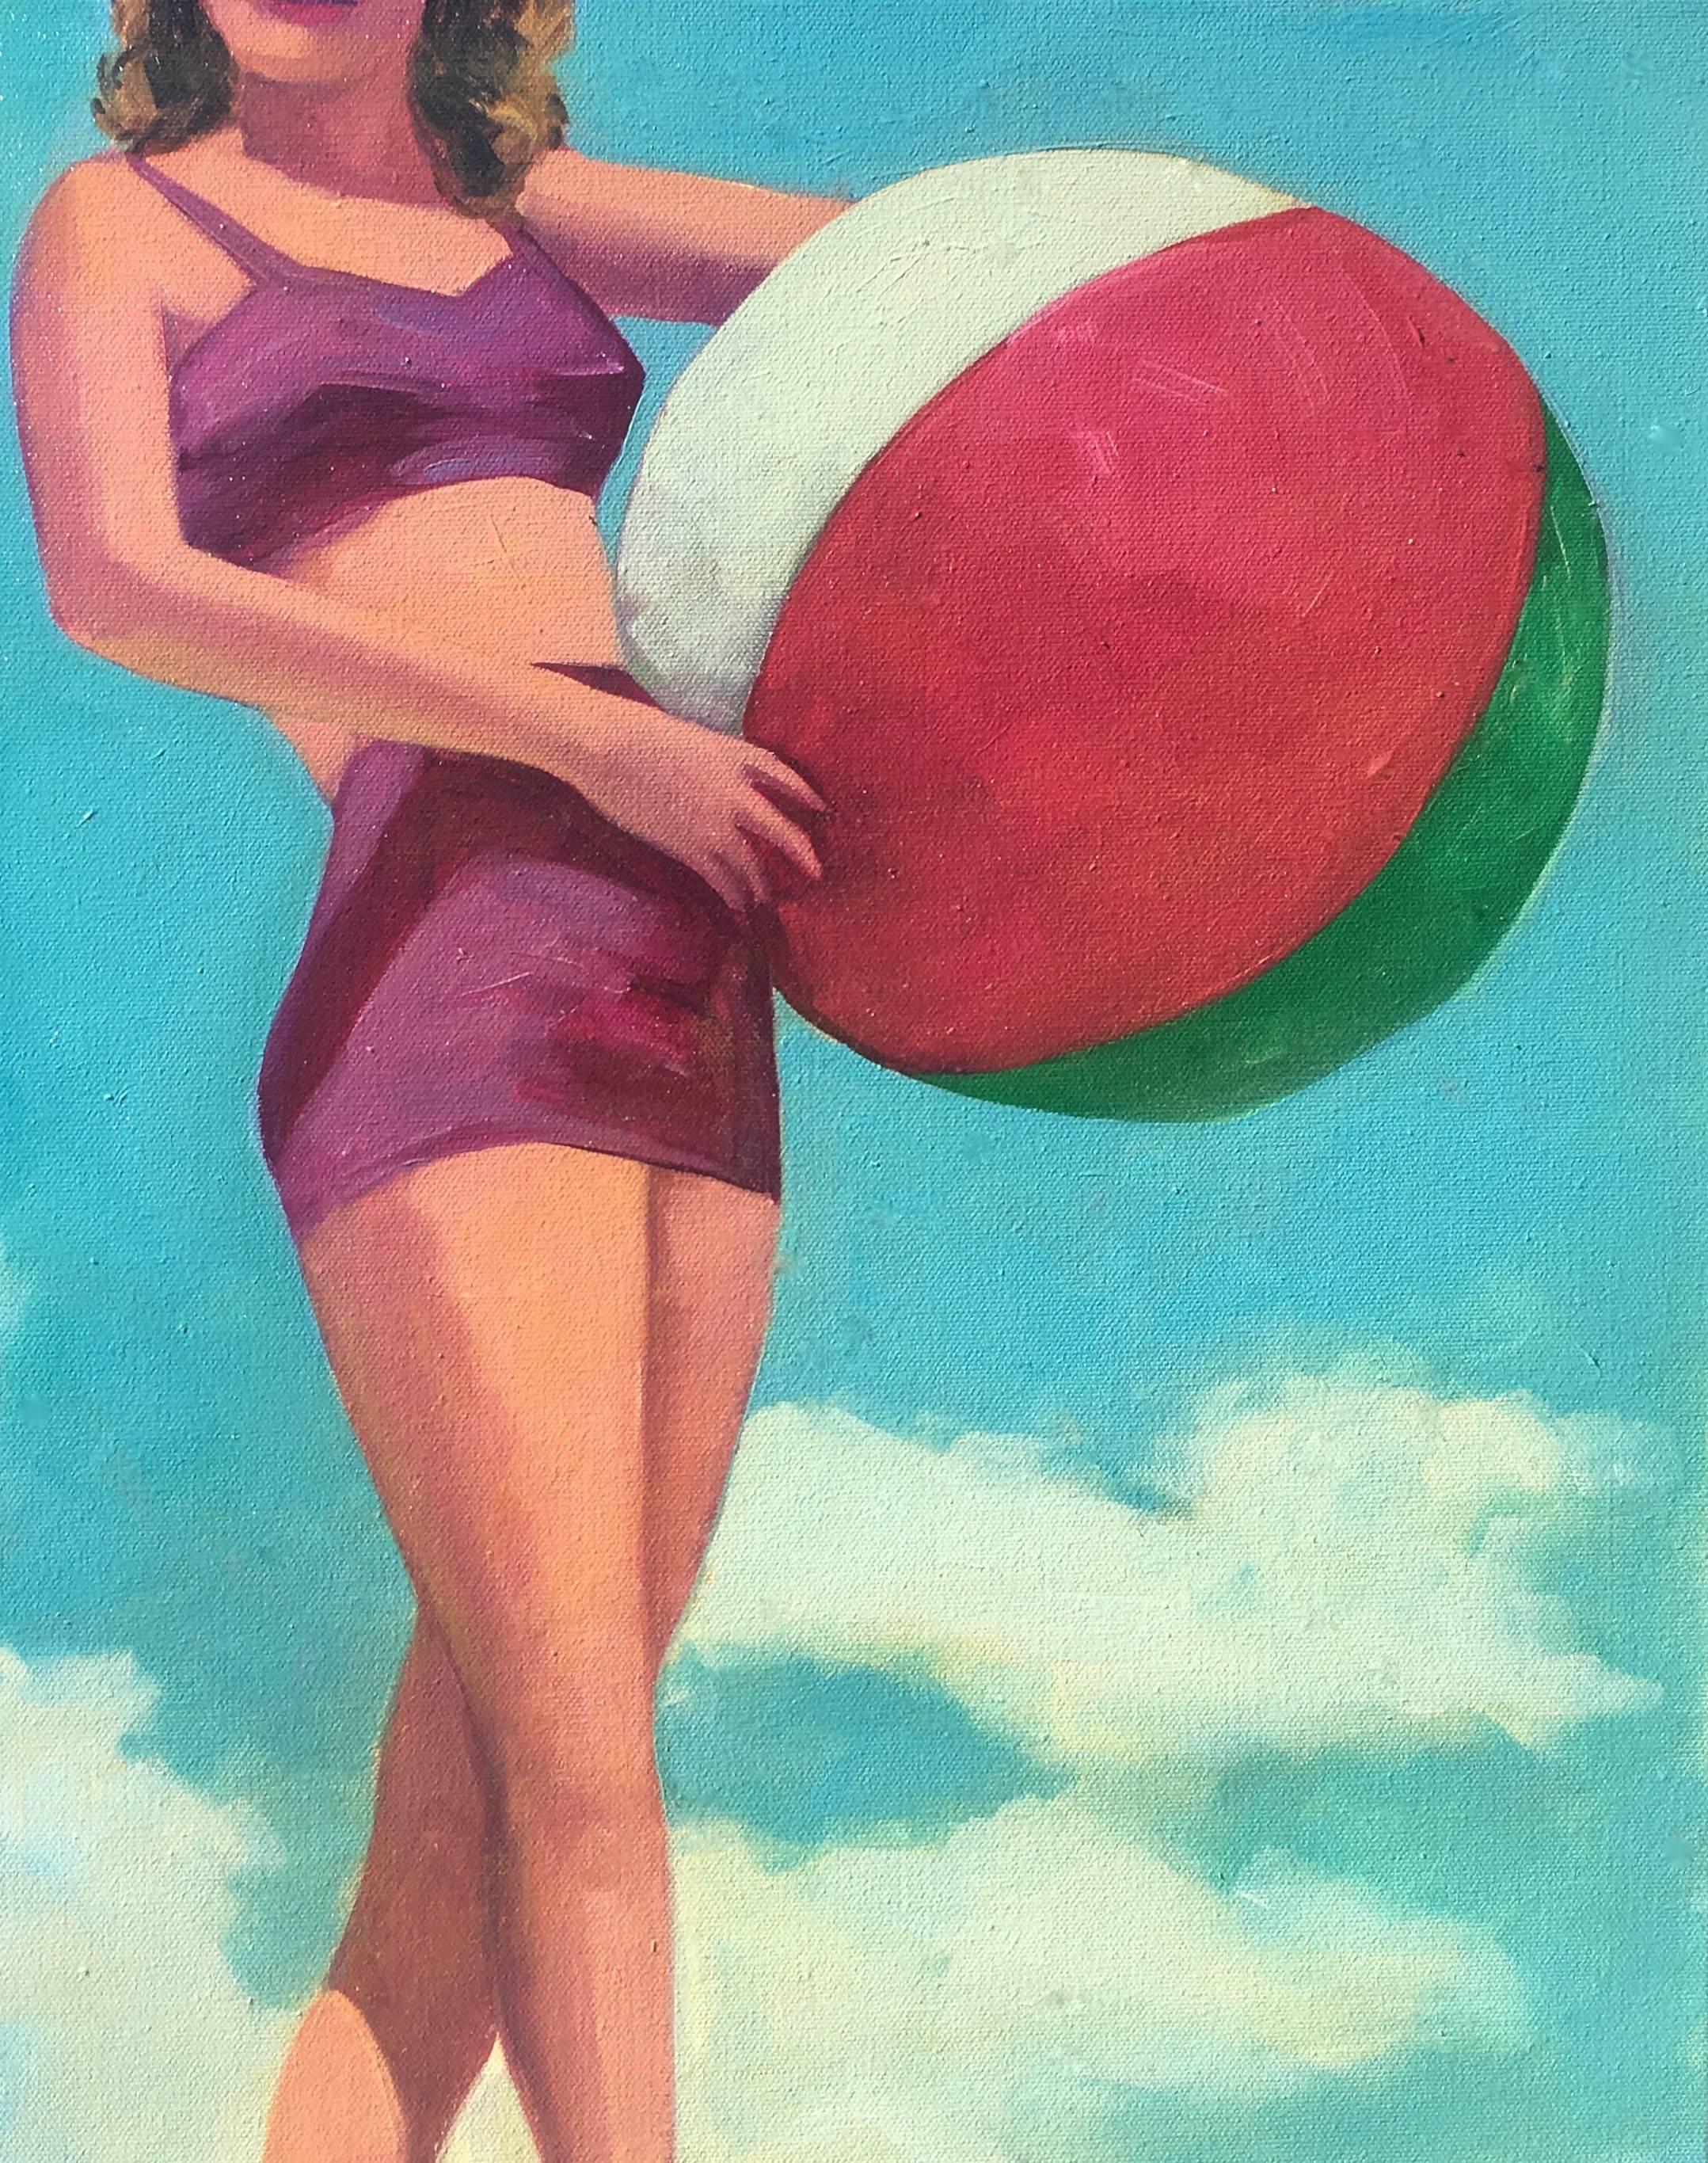 T.S. Harris Figurative Painting - "Summer Sunshine" Woman in Purple Bathing Suit with Turquoise Sky